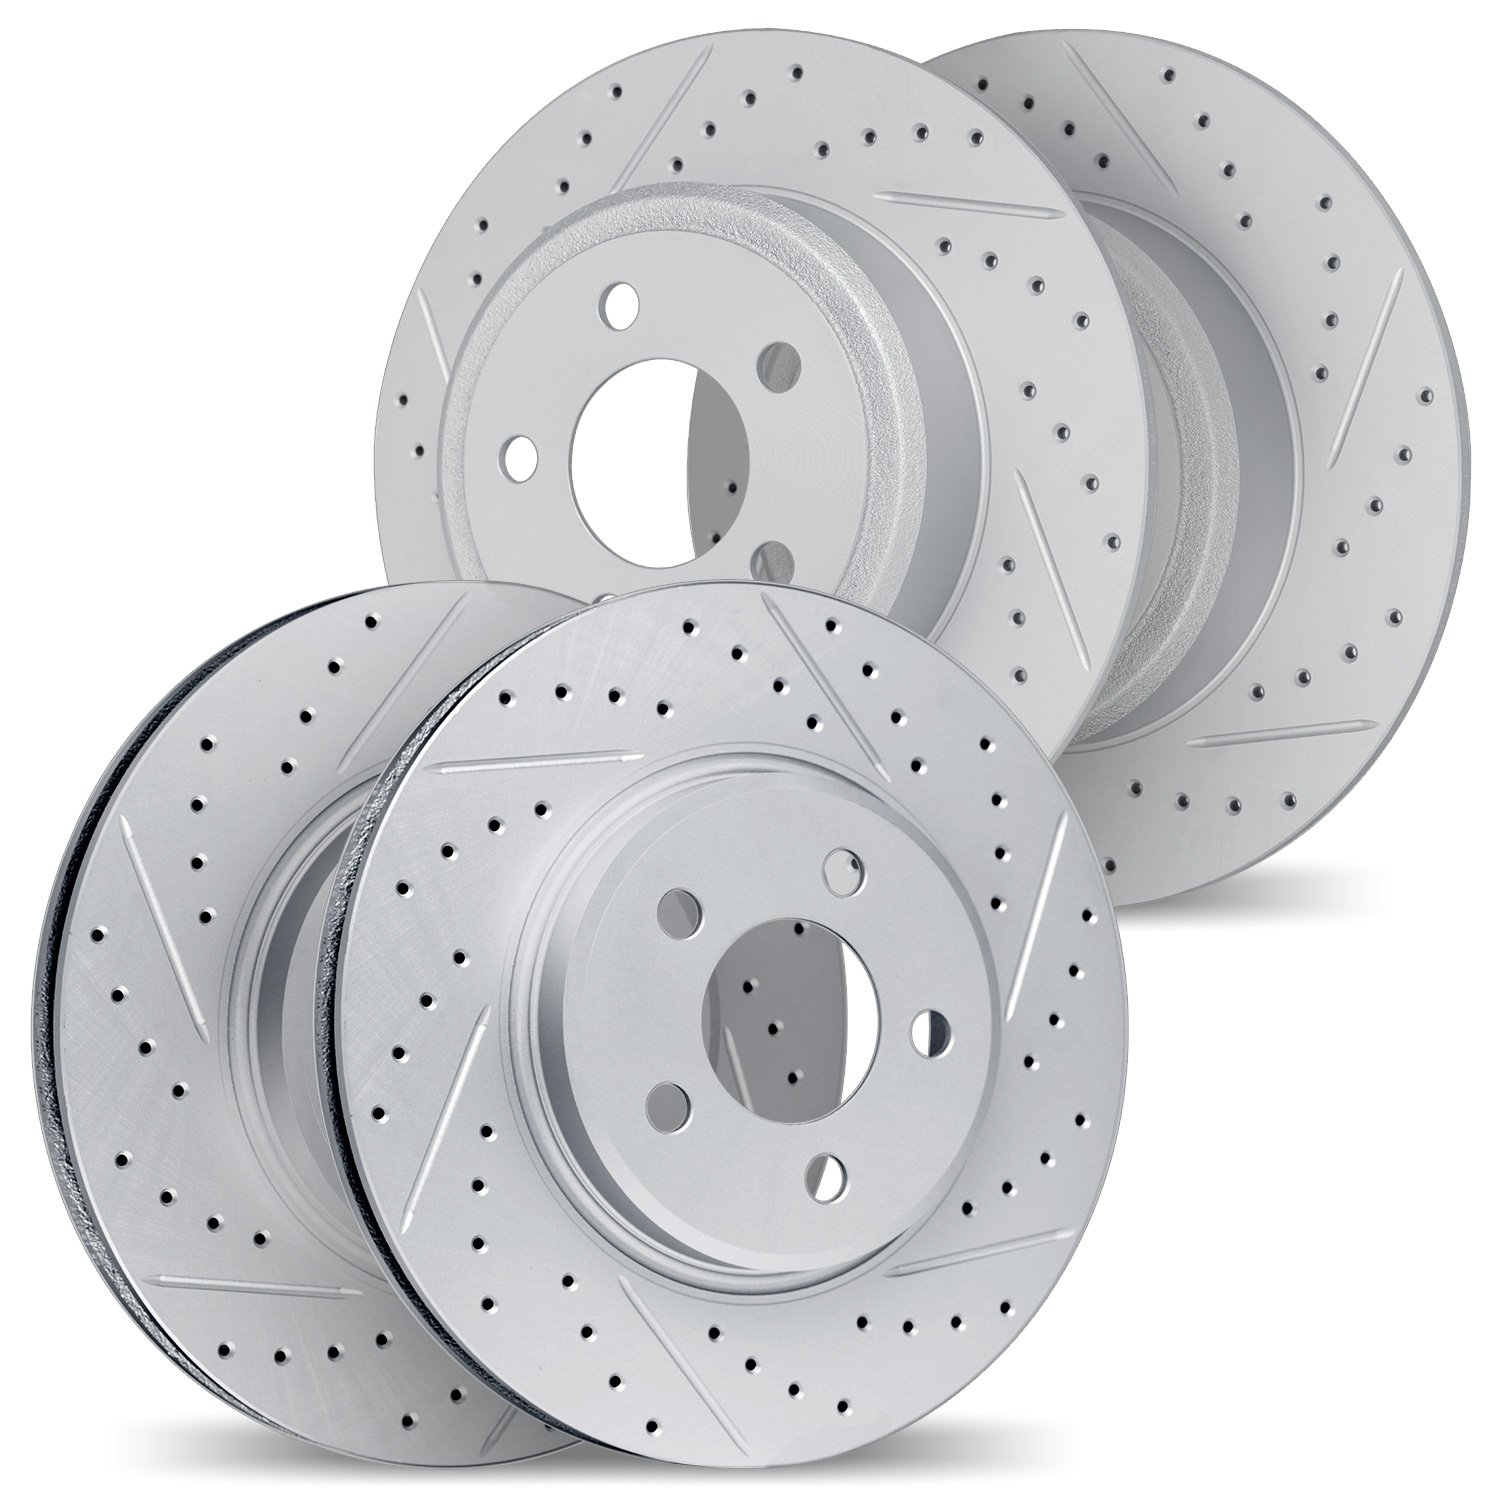 2004-80002 Geoperformance Drilled/Slotted Brake Rotors, 1993-2003 Ford/Lincoln/Mercury/Mazda, Position: Front and Rear